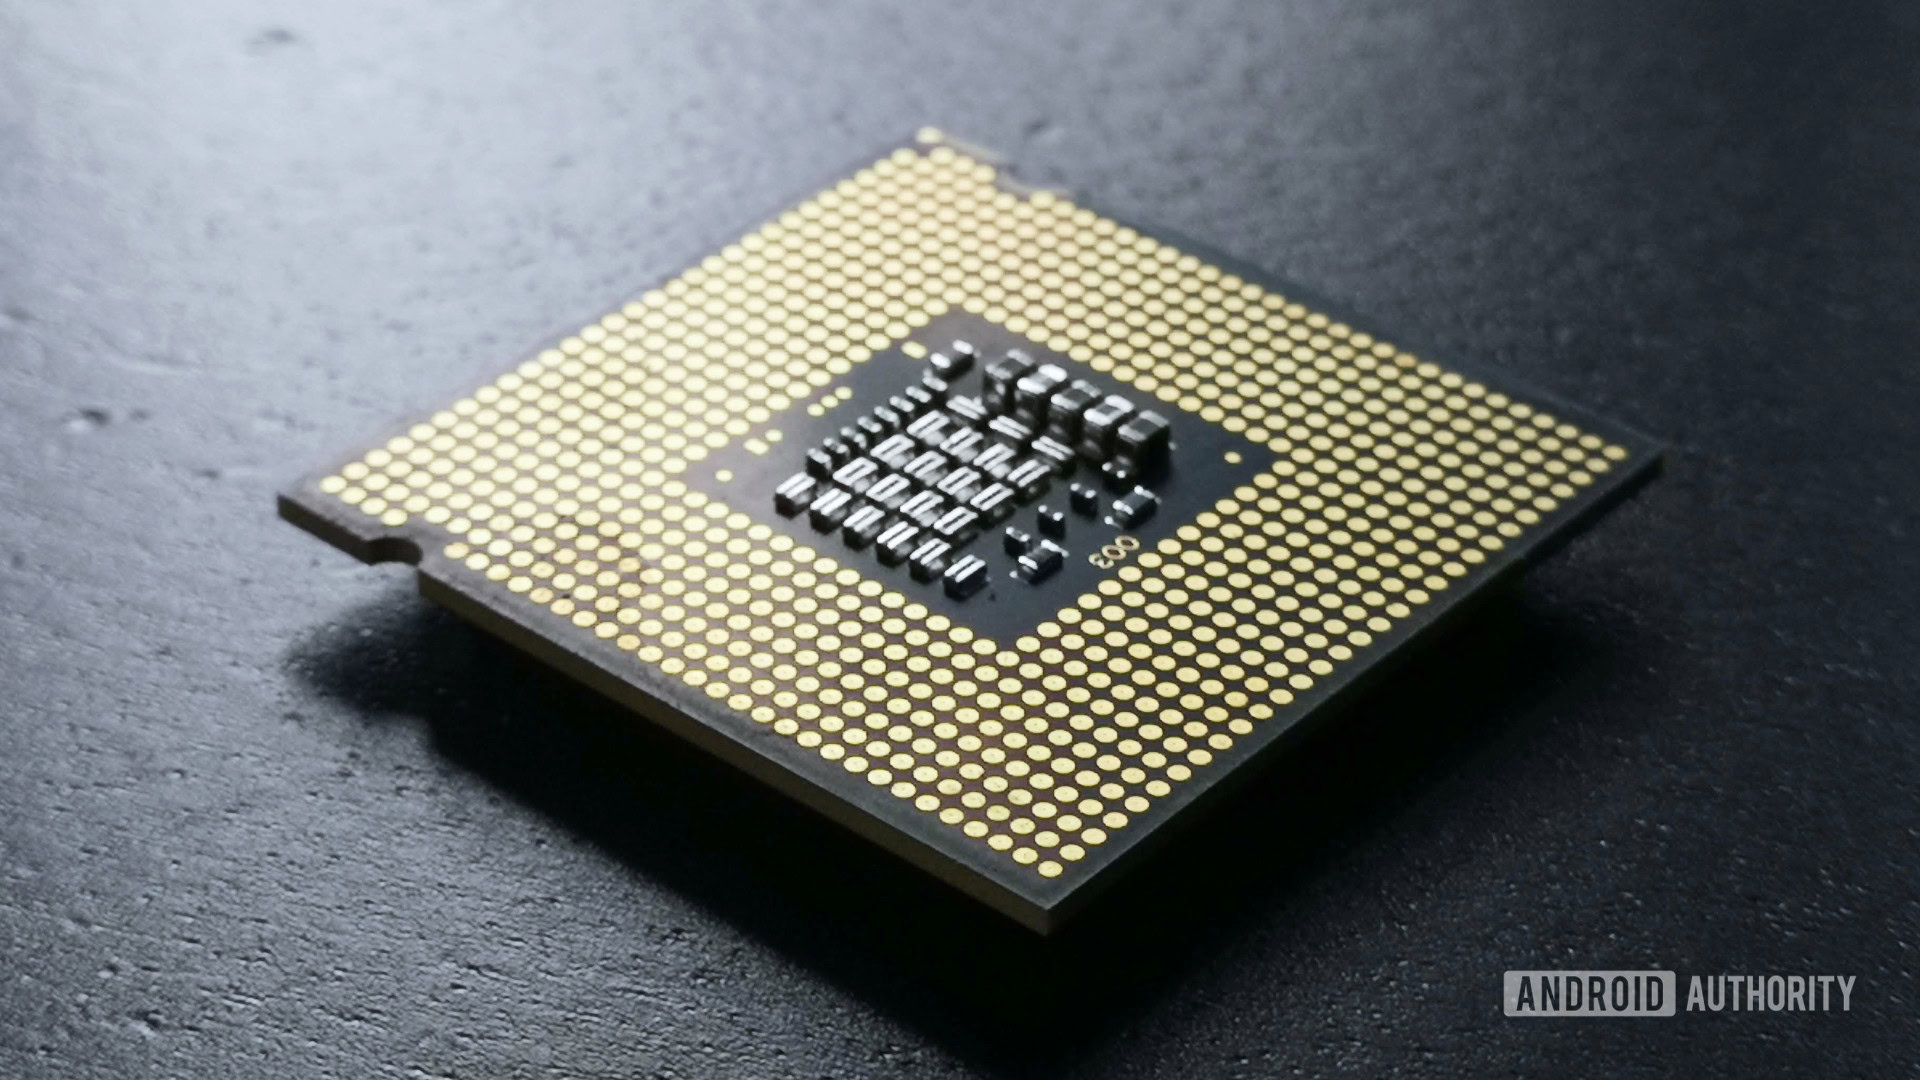 Processor chip with pins facing upwards